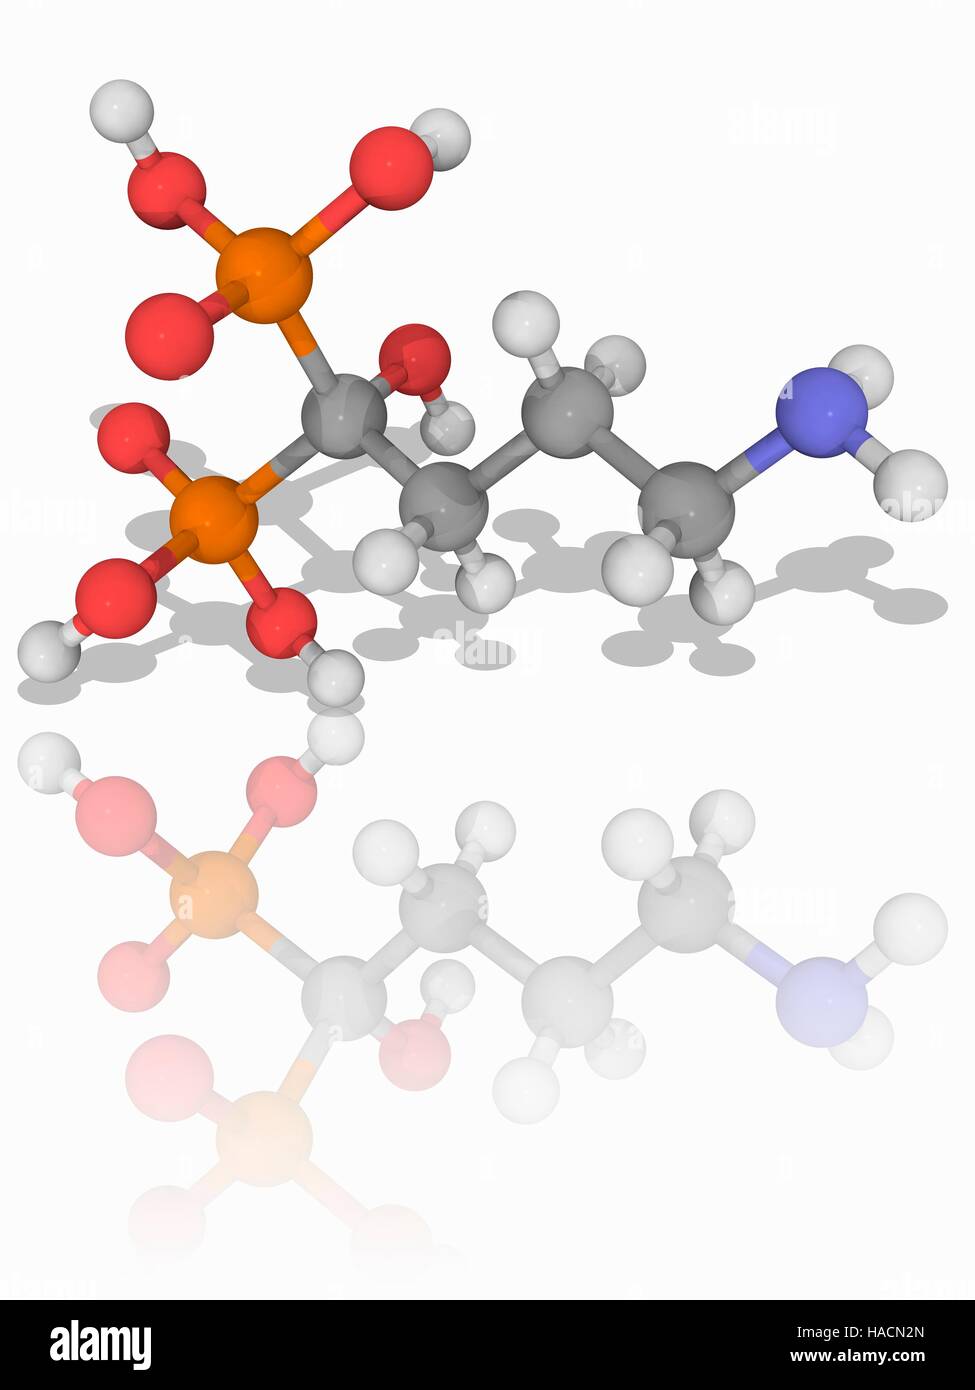 Alendronic acid. Molecular model of the biphosphonate drug alendronic acid (C4.H13.N.O7.P2), used for treatment of osteoporosis. Atoms are represented as spheres and are colour-coded: carbon (grey), hydrogen (white), nitrogen (blue), oxygen (red) and phosphorus (orange). Illustration. Stock Photo